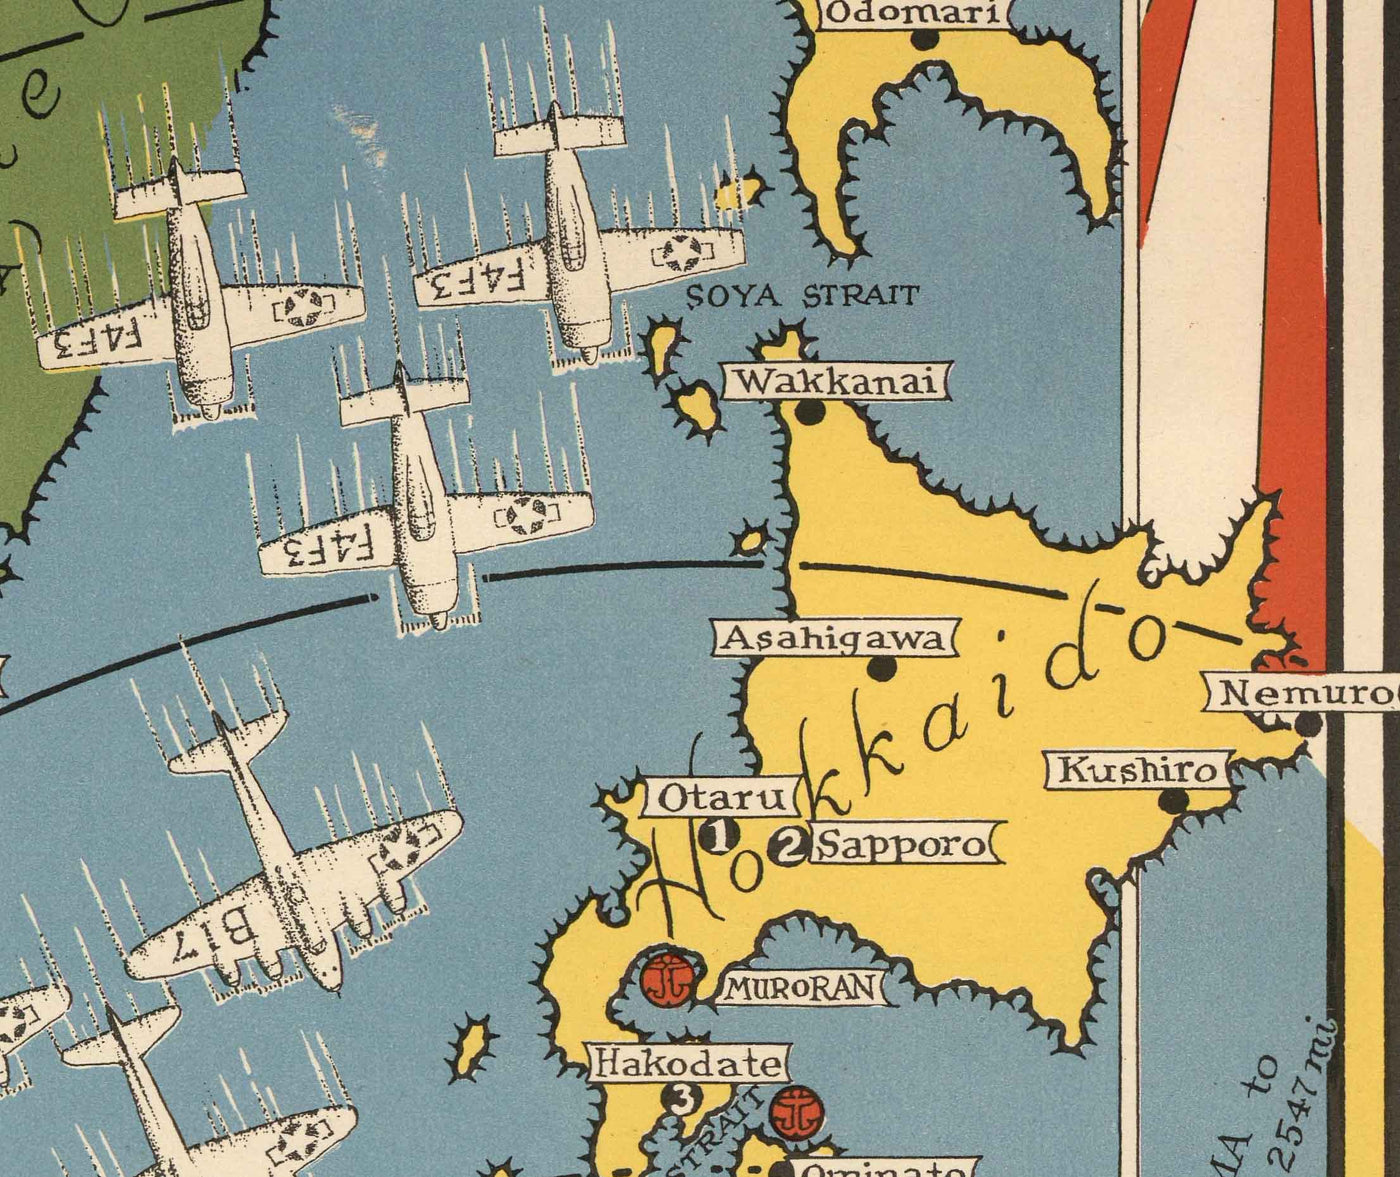 World War 2 "Japan the Target" Pictorial Map, 1942 by Ernest Dudley Chase - Illustrated Old WW2 Bombing Chart - China, Japan, Korea